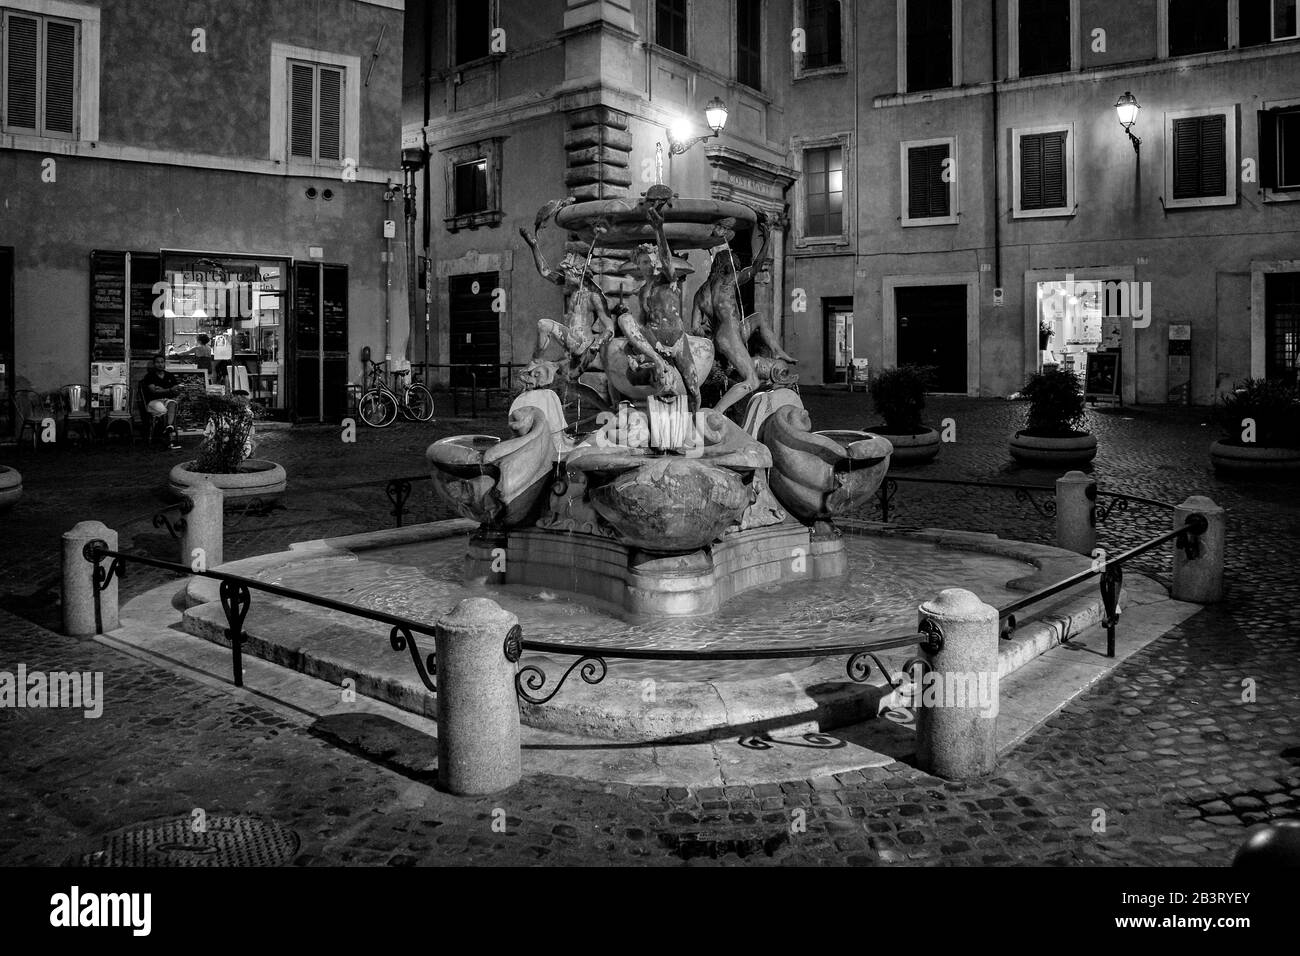 Rome, Italy, Europe: Turtles Fountain is a fountain in Rome that is located in the small Piazza Mattei, in the Sant'Angelo distric Stock Photo